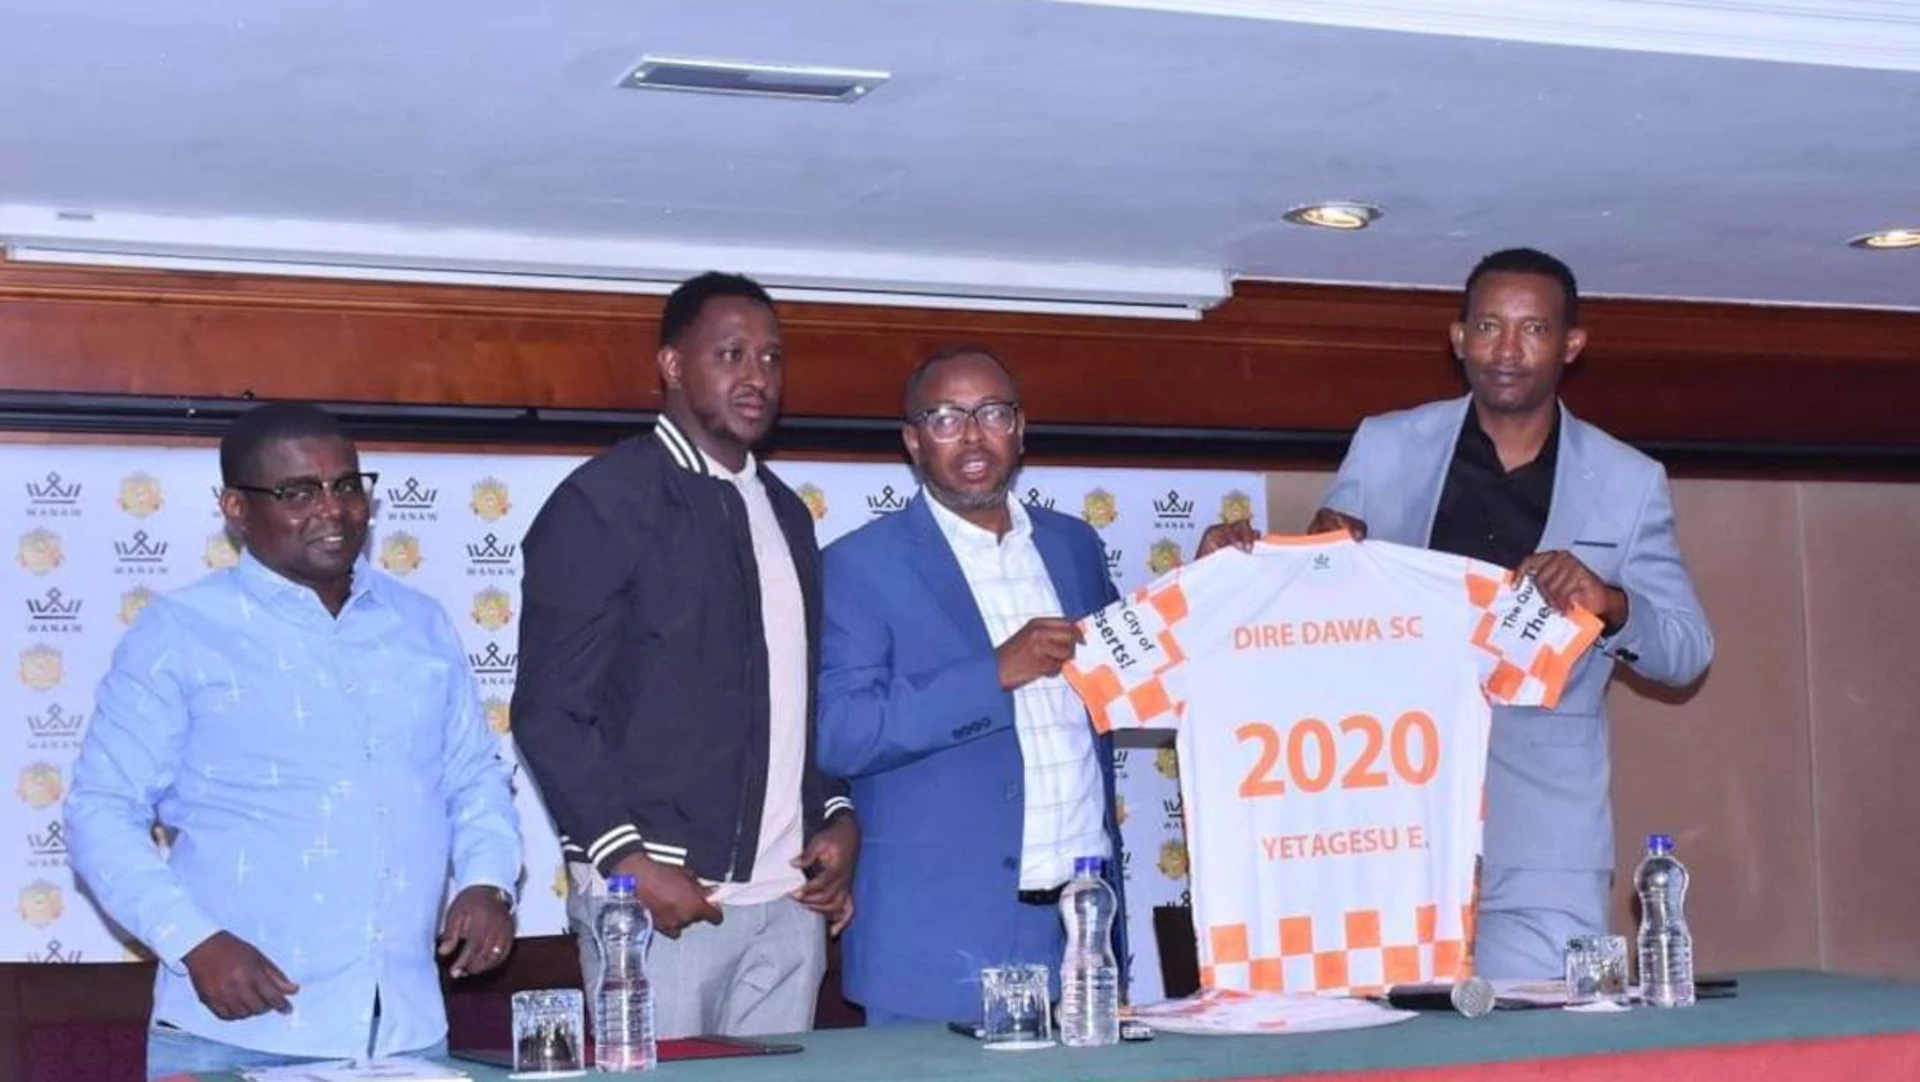 Endale appointed head coach of Dire Dawa 